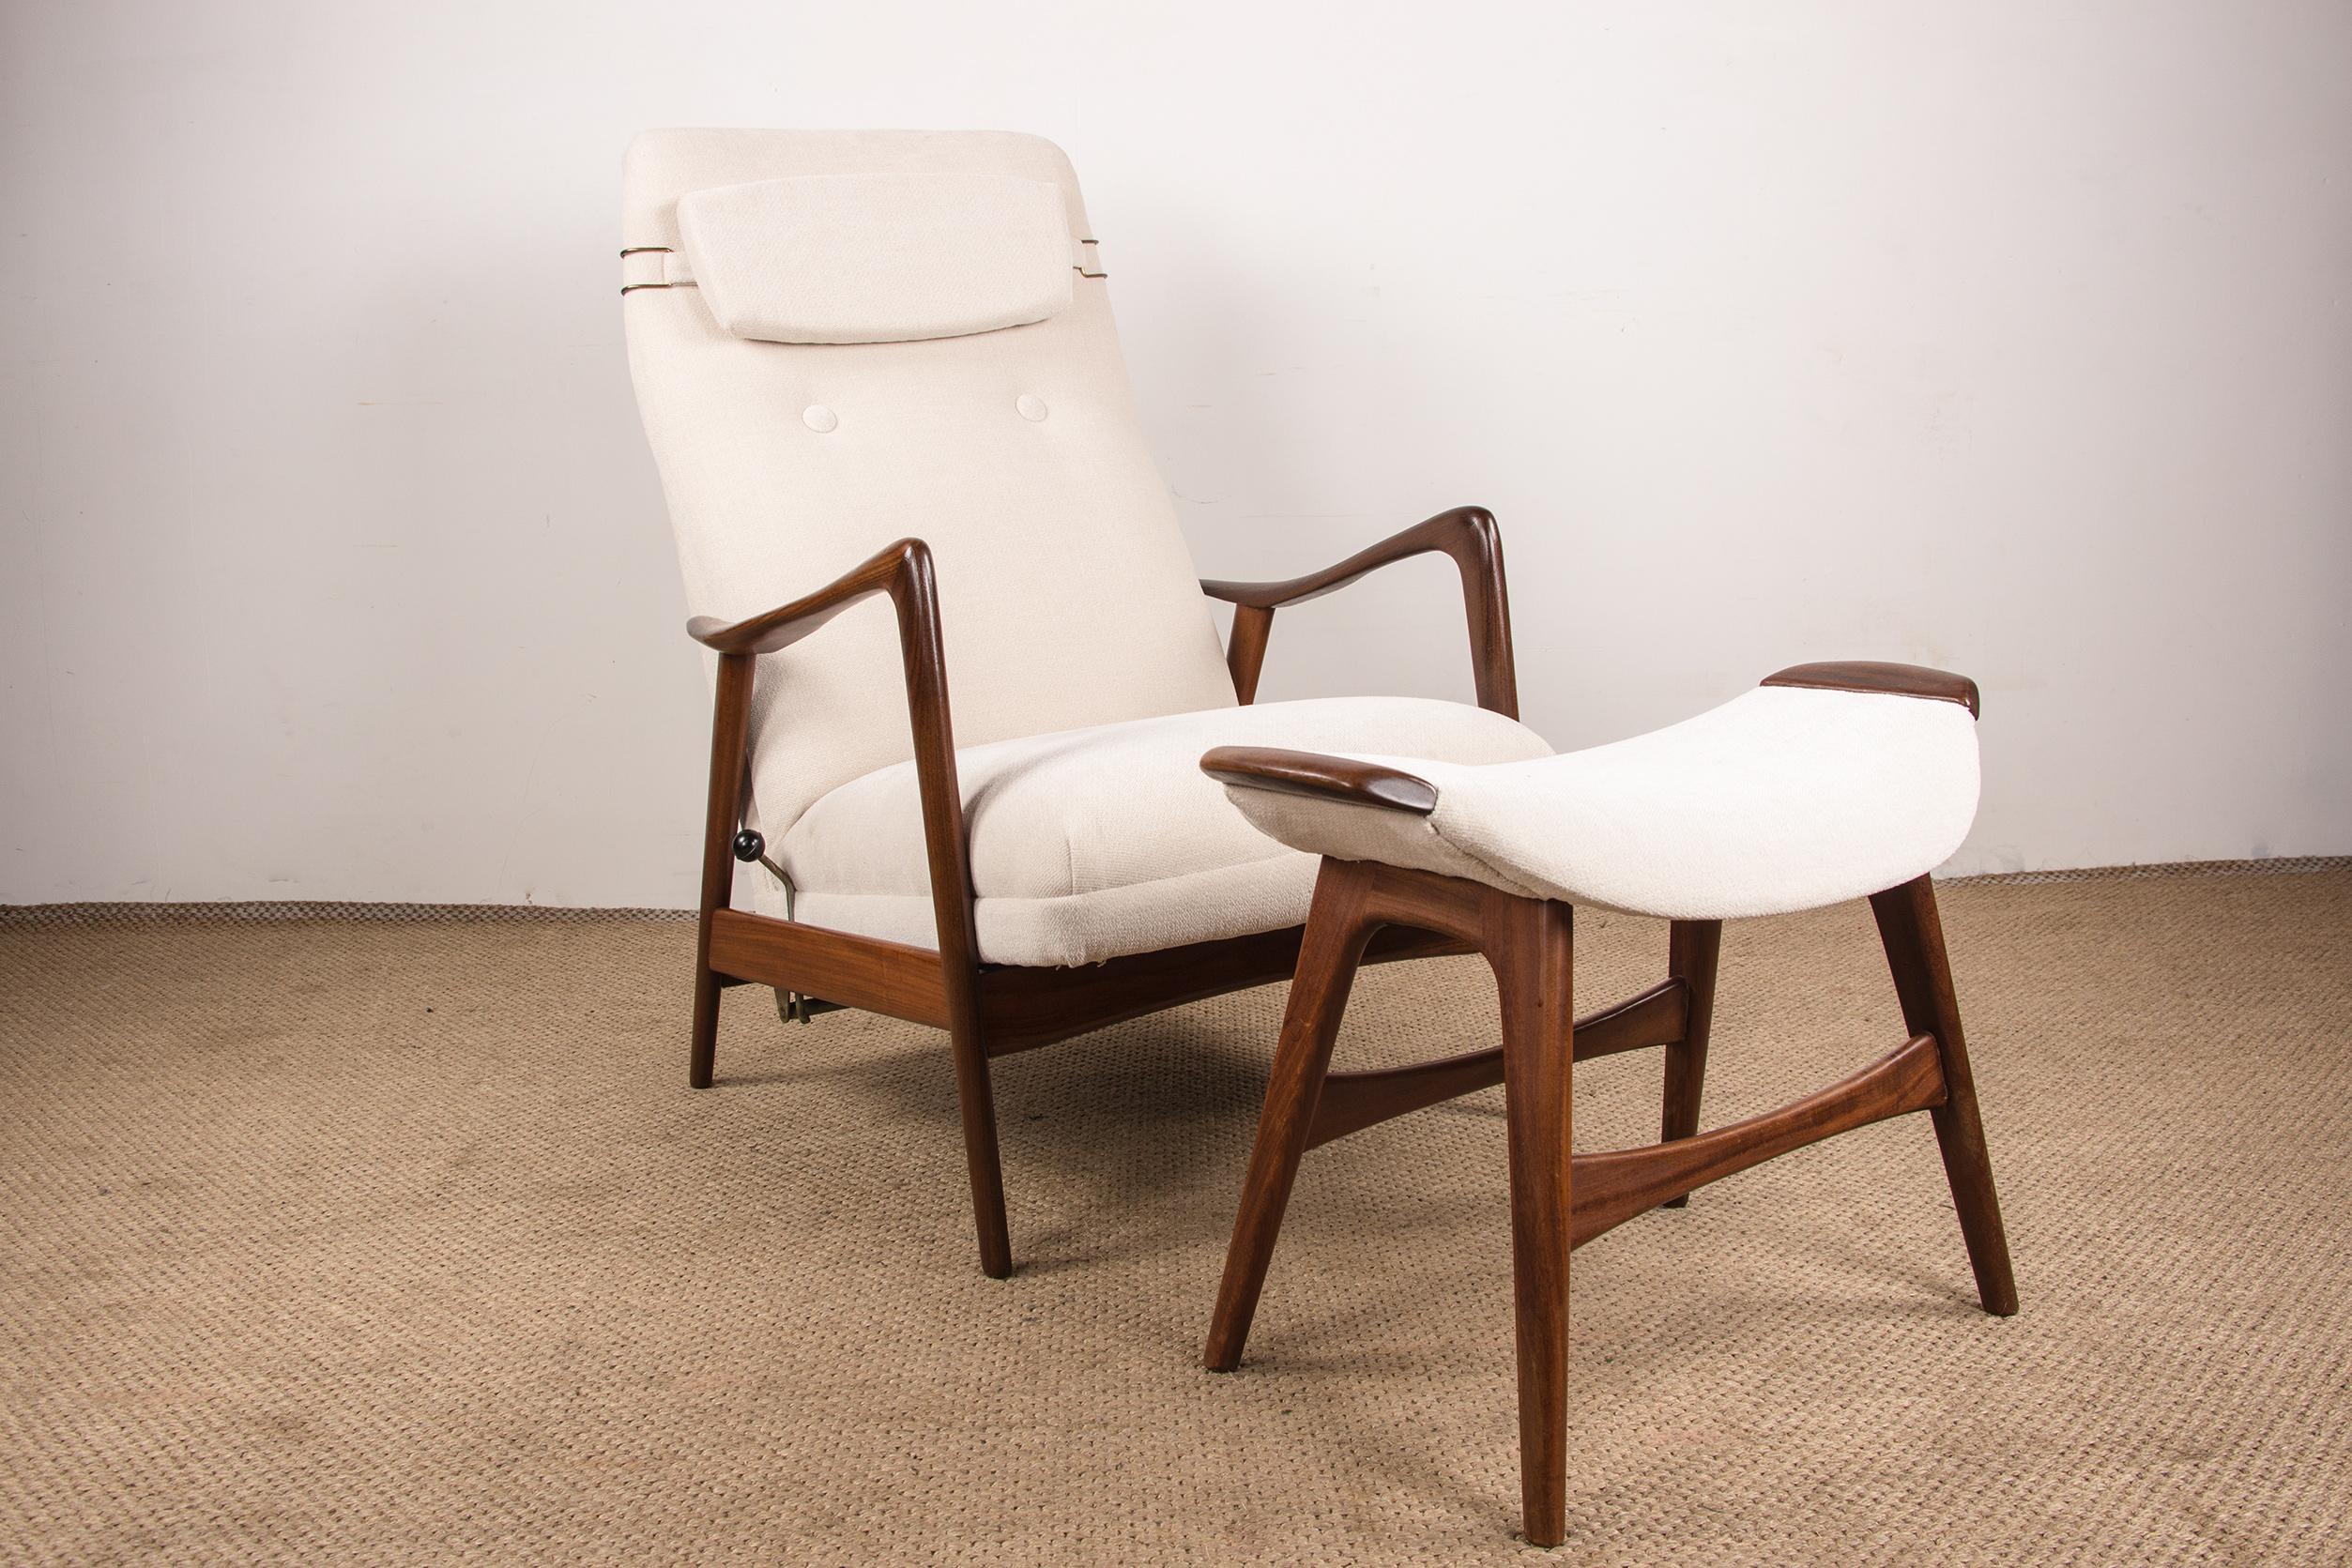 Mid-20th Century Large Scandinavian Teak Armchair with Ottomans by Folke Ohlsson for Westnofa 196 For Sale